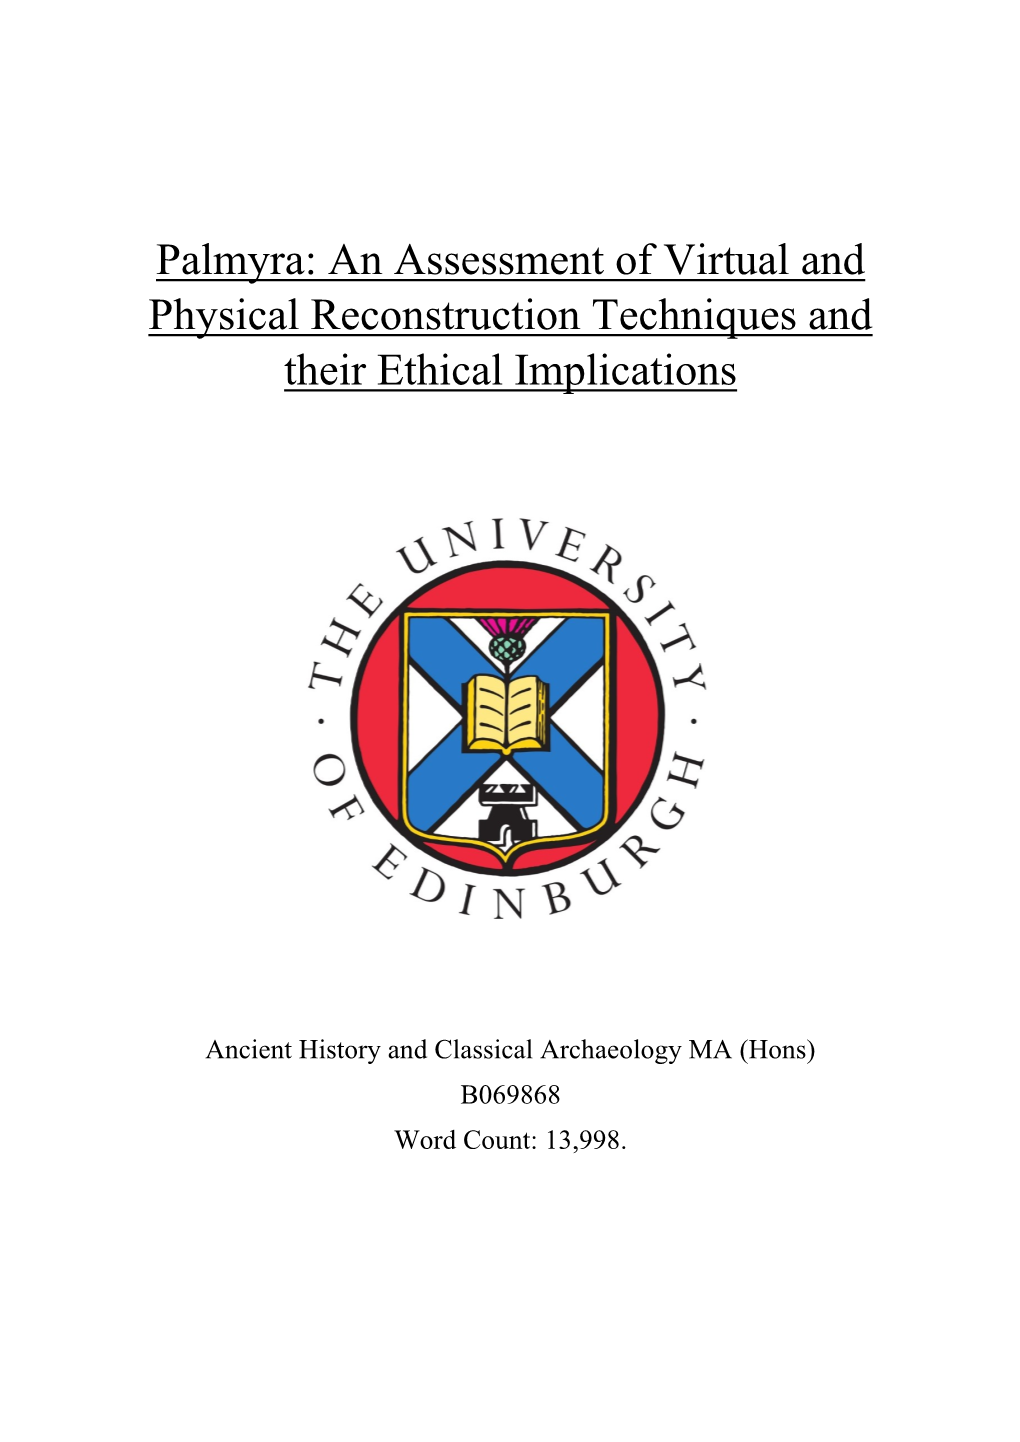 Palmyra: an Assessment of Virtual and Physical Reconstruction Techniques and Their Ethical Implications